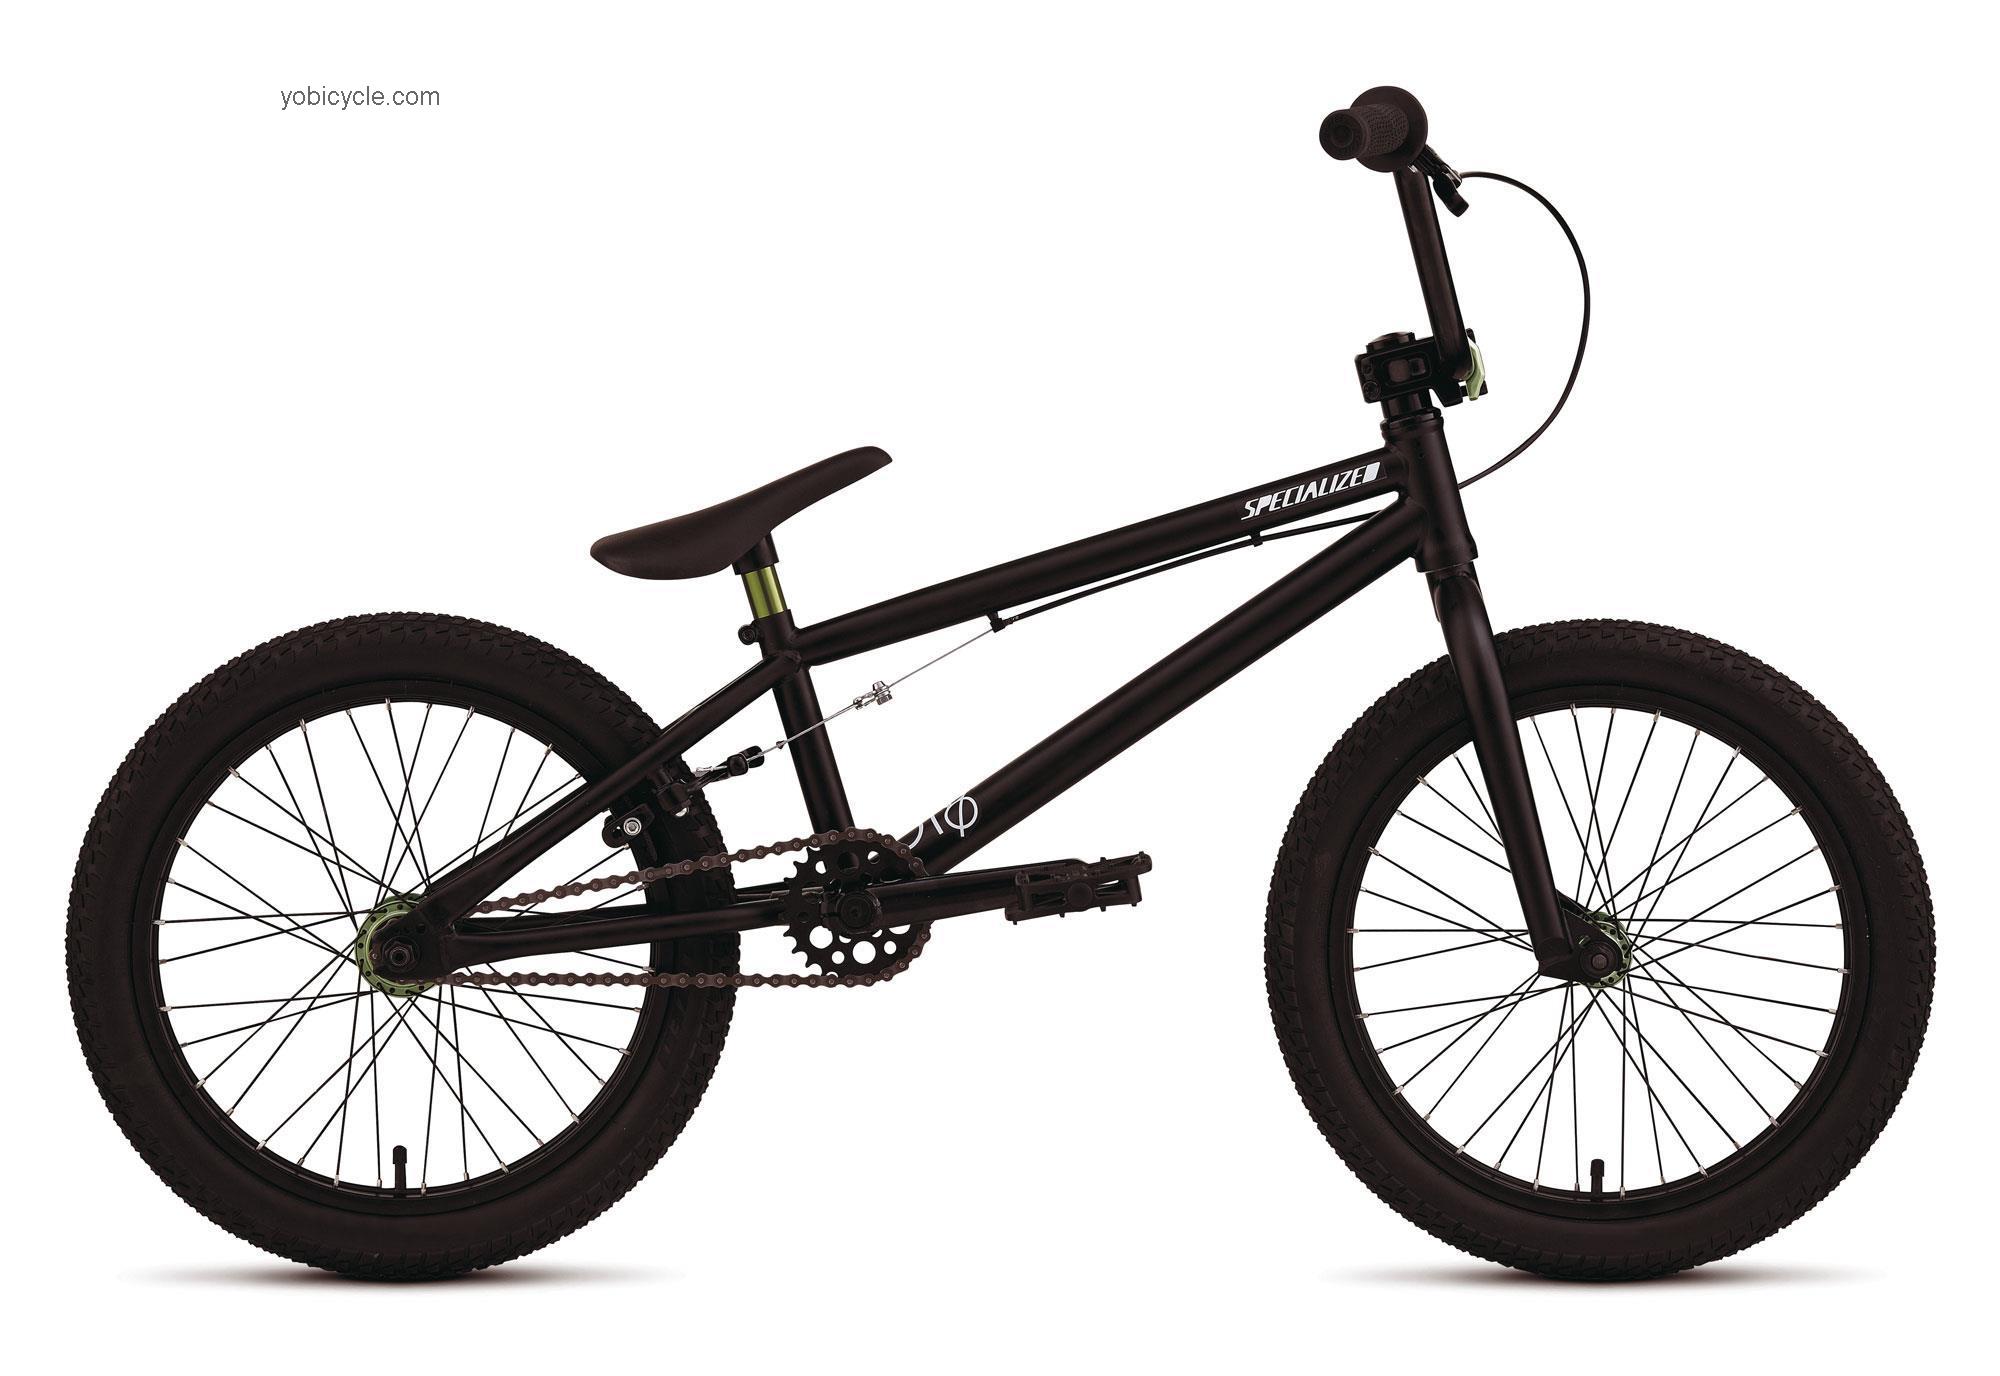 Specialized P18 AM 2012 comparison online with competitors